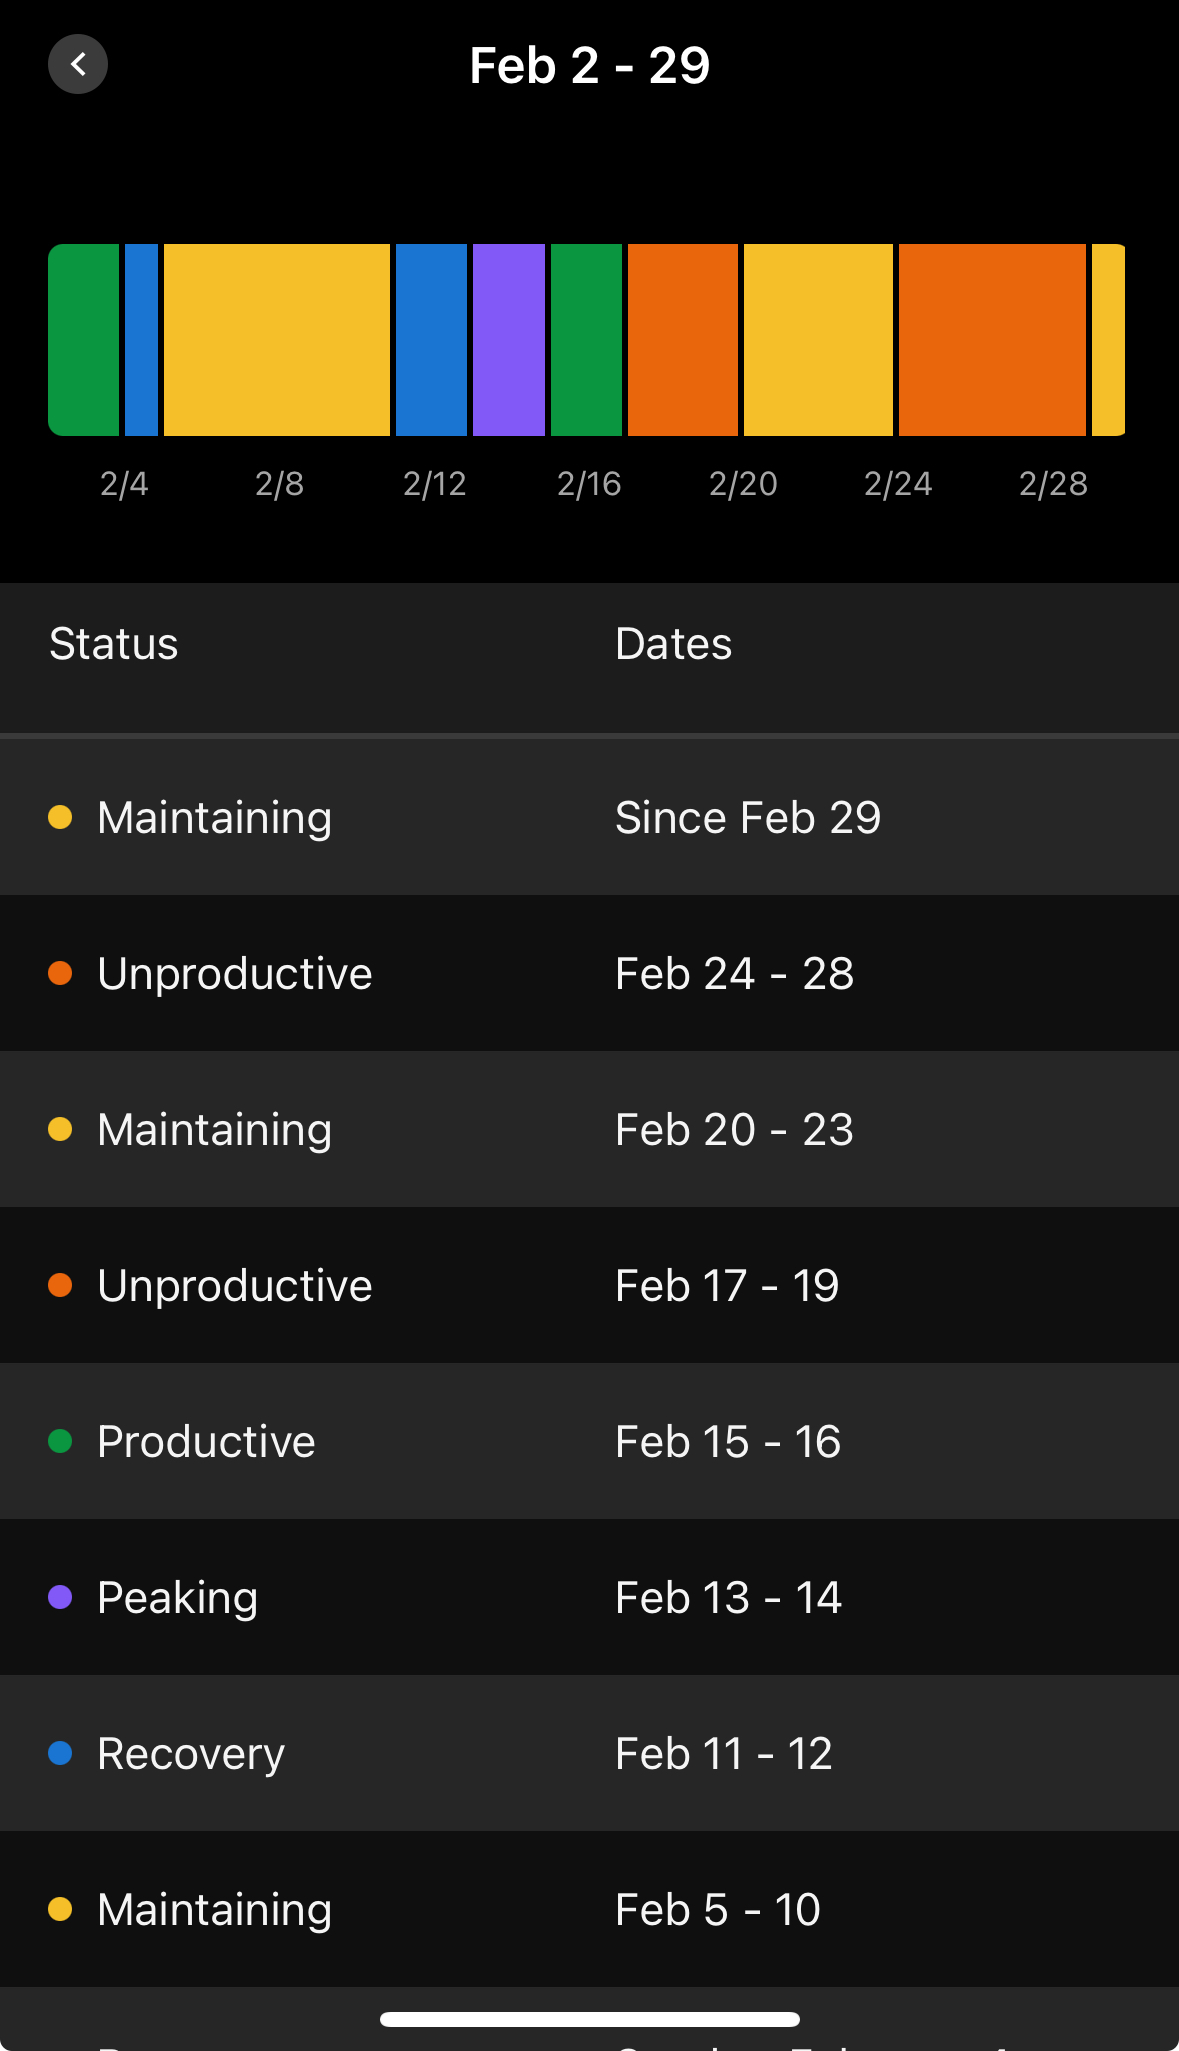 A screenshot of Garmin's 4-week fitness state summary, which shows the Feb 19-29 period as in either a Maintaining or an Unproductive state, relative to the other 2.5 weeks before it that show mixtures of Productive and Maintaining.